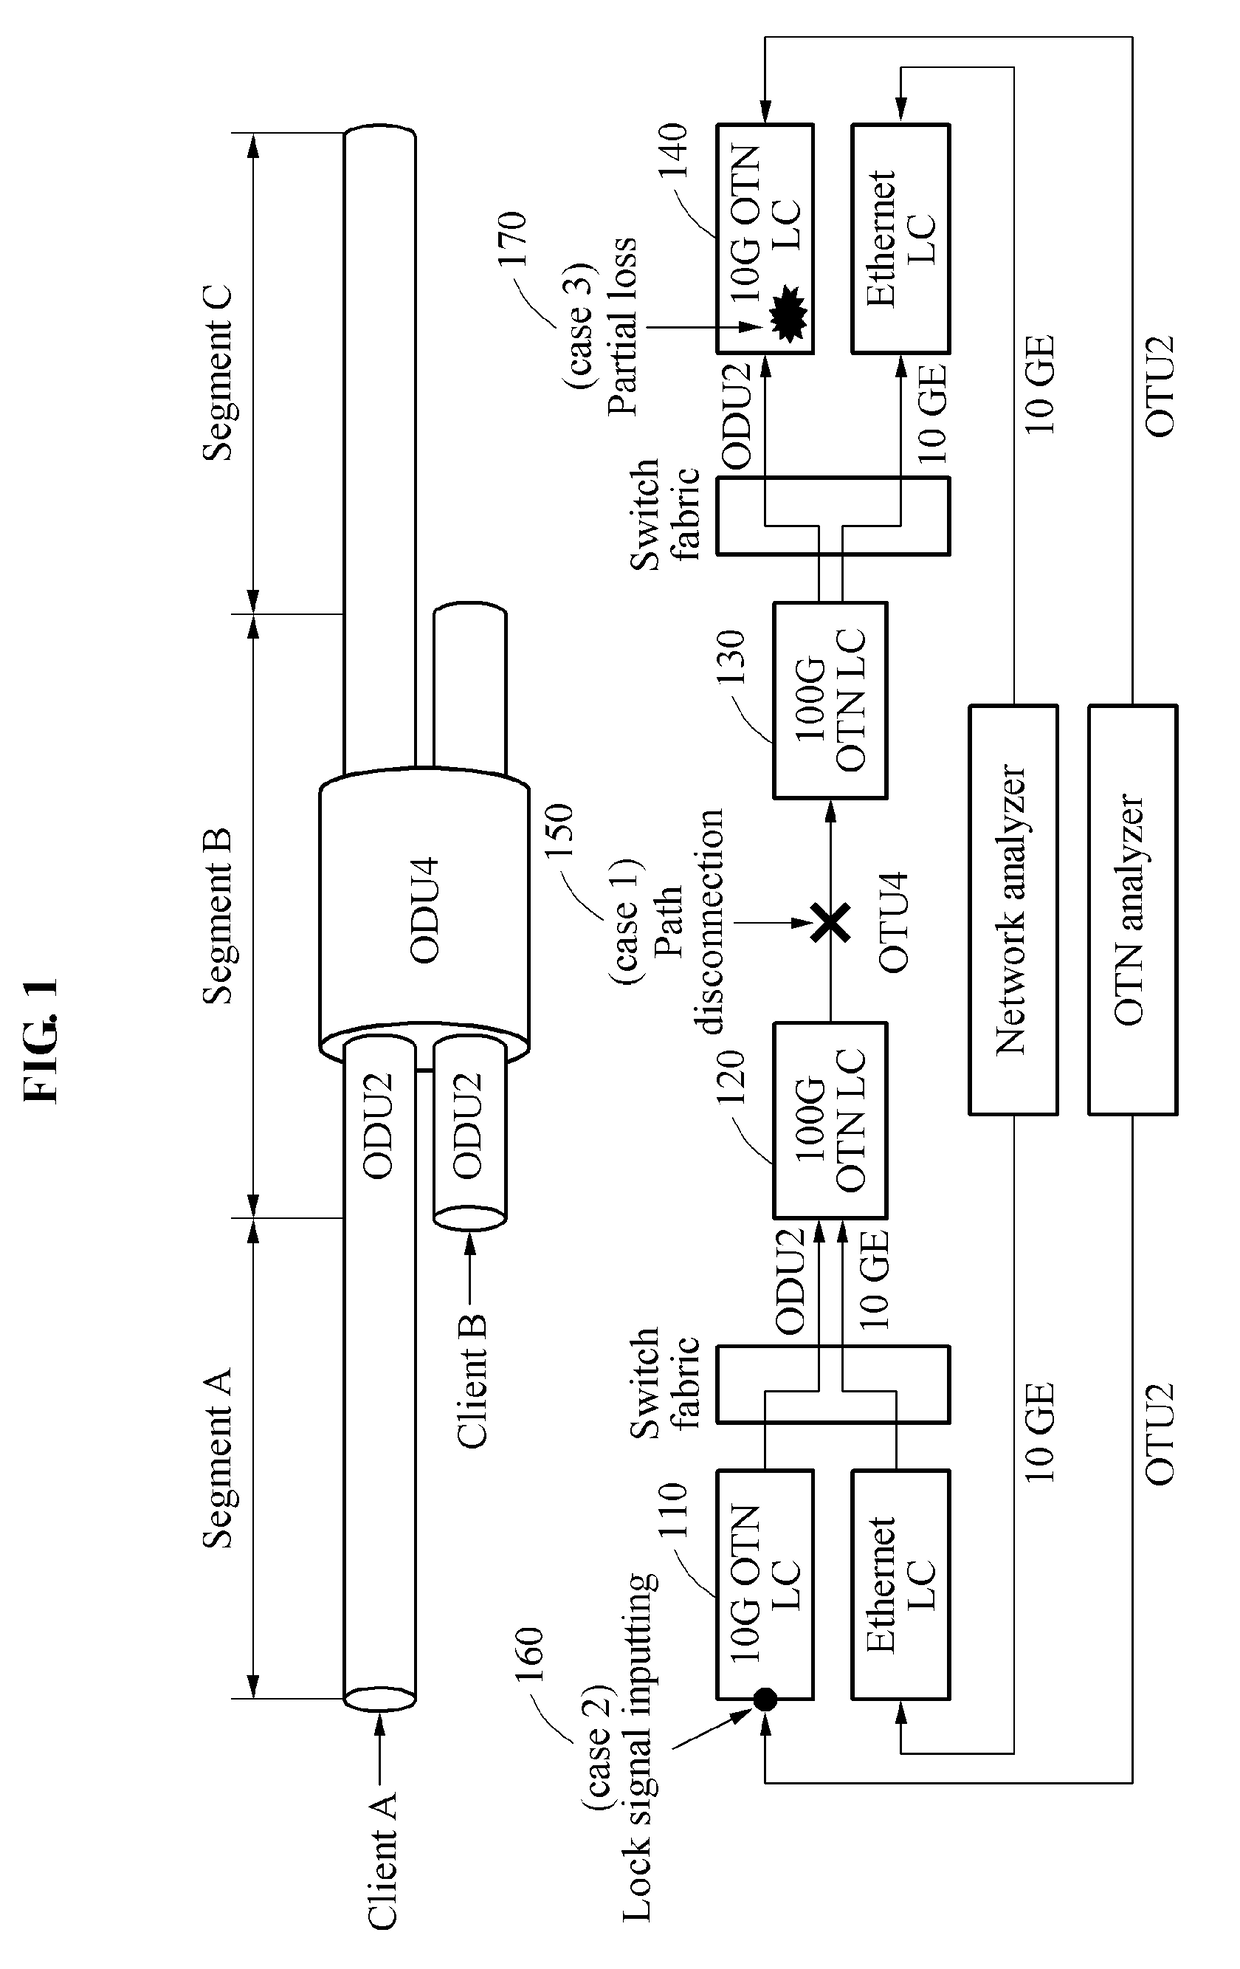 Apparatus and method for localizing defect location and apparatus and method for identifying cause of defect in optical transport network (OTN) based on tandem connection monitoring (TCM) coordinates and defect traceback